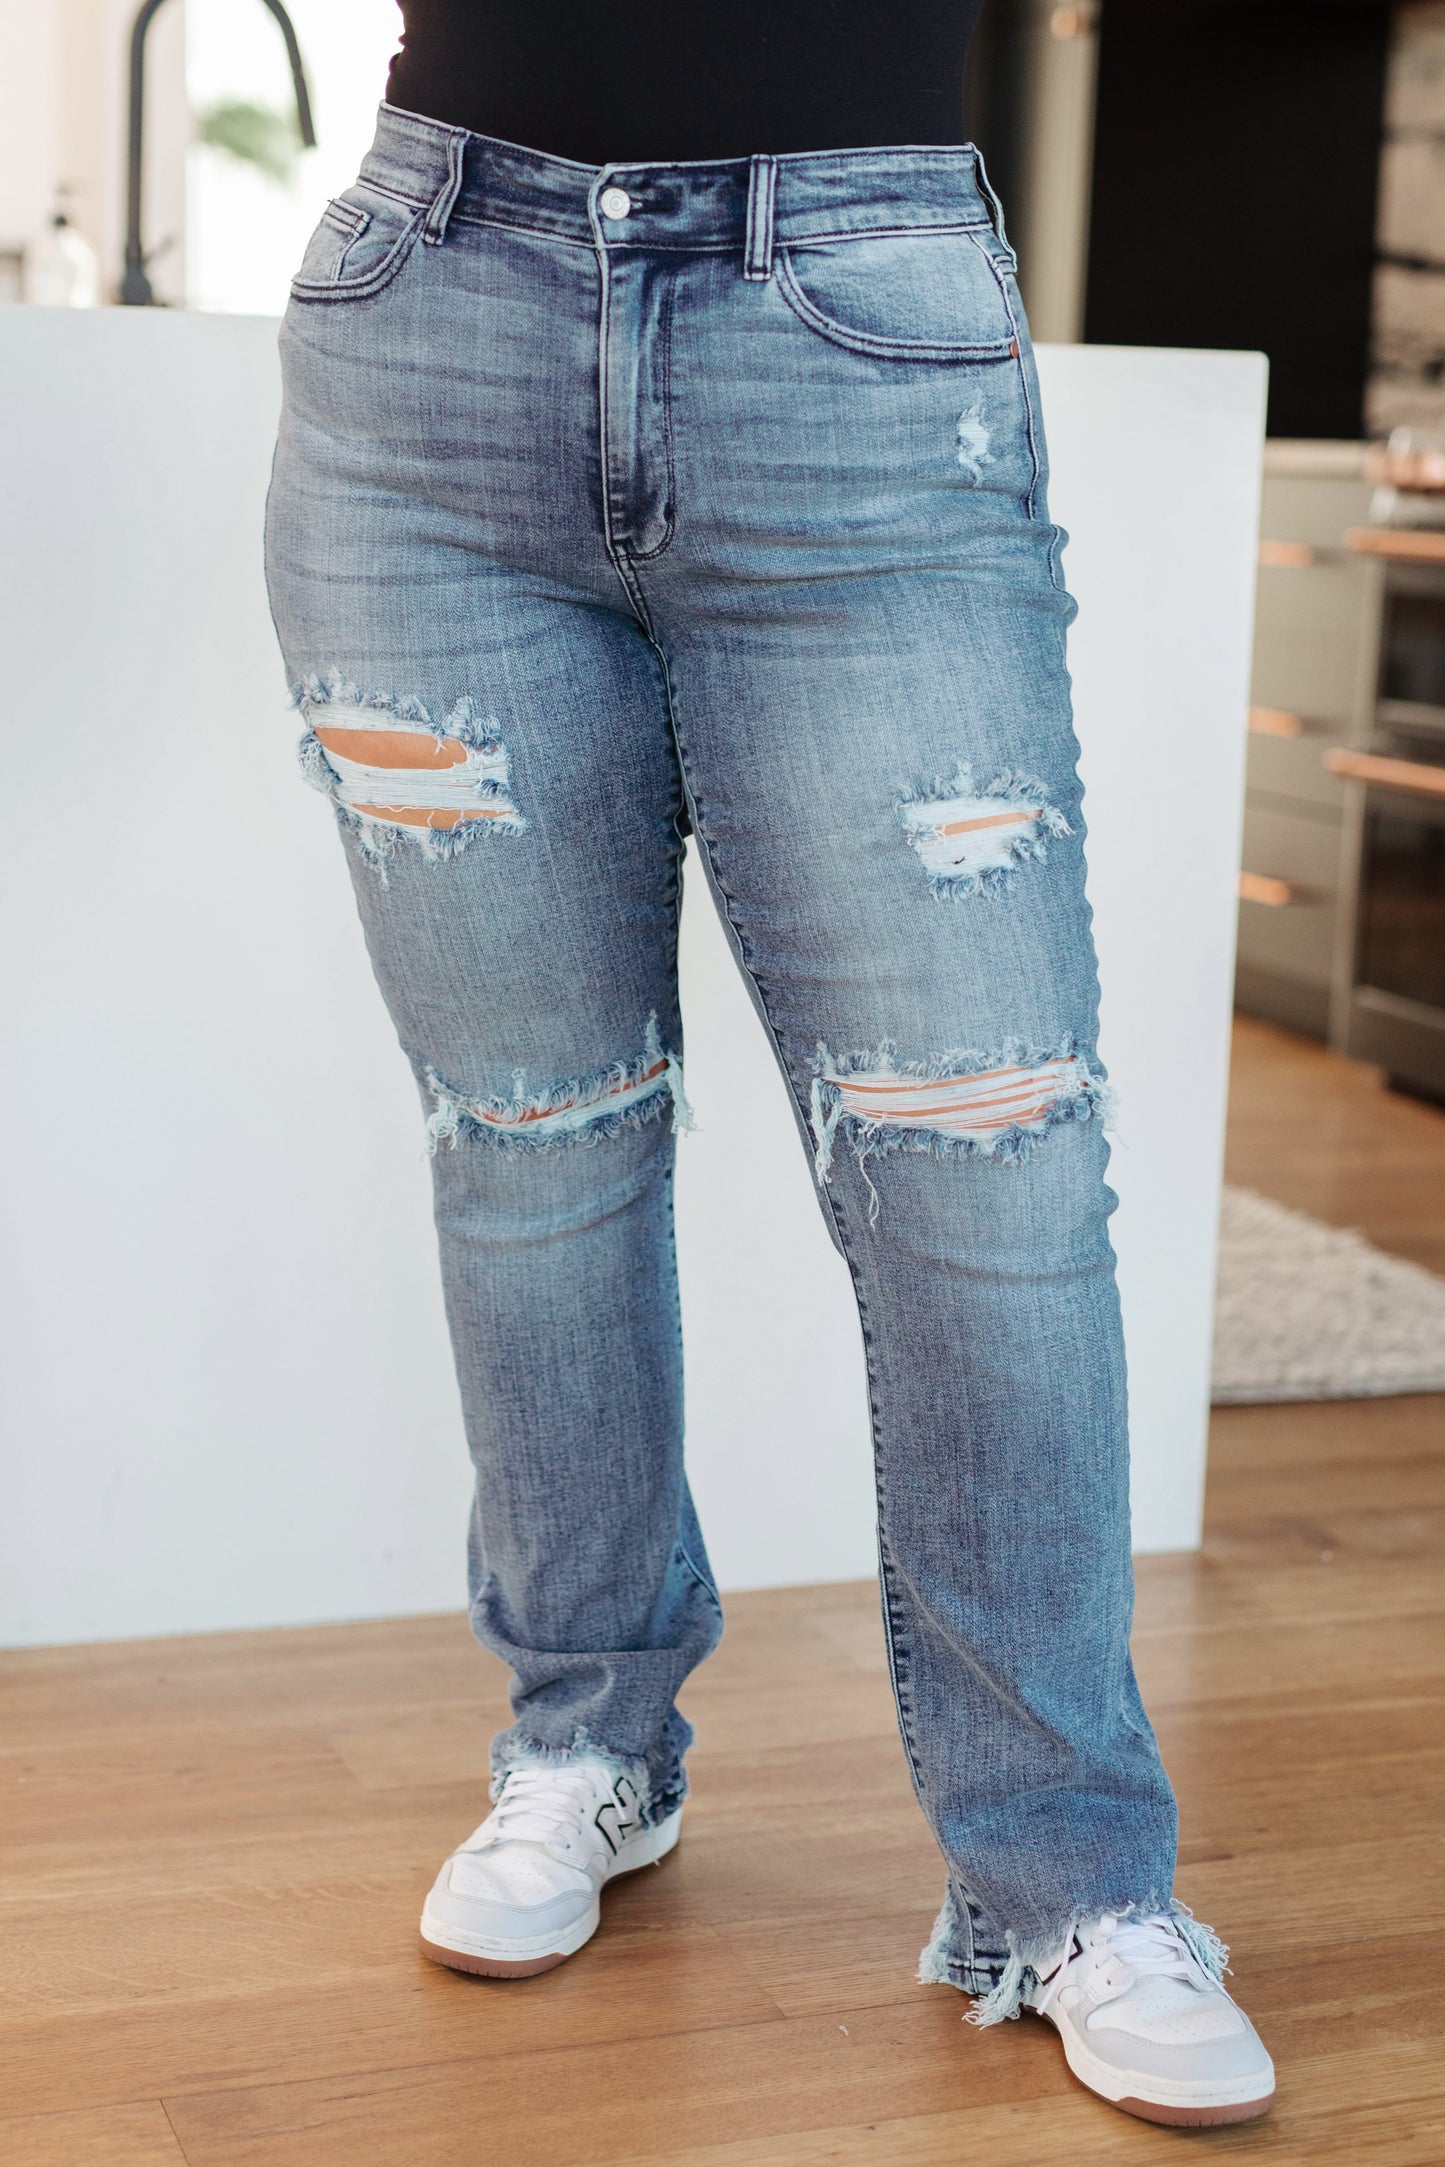 The O'Hara Destroyed Straight Jeans have the perfect balance of style, versatility, and timelessness! Featuring a stretch denim that shapes a mid rise waist with a five pocket cut and zipper fly. A slim fit through the thigh flares out at the ankle creating a straight cut silhouette. To top it off- these jeans have the perfect amount of distressing for an effortless cool girl look! 0 -24W